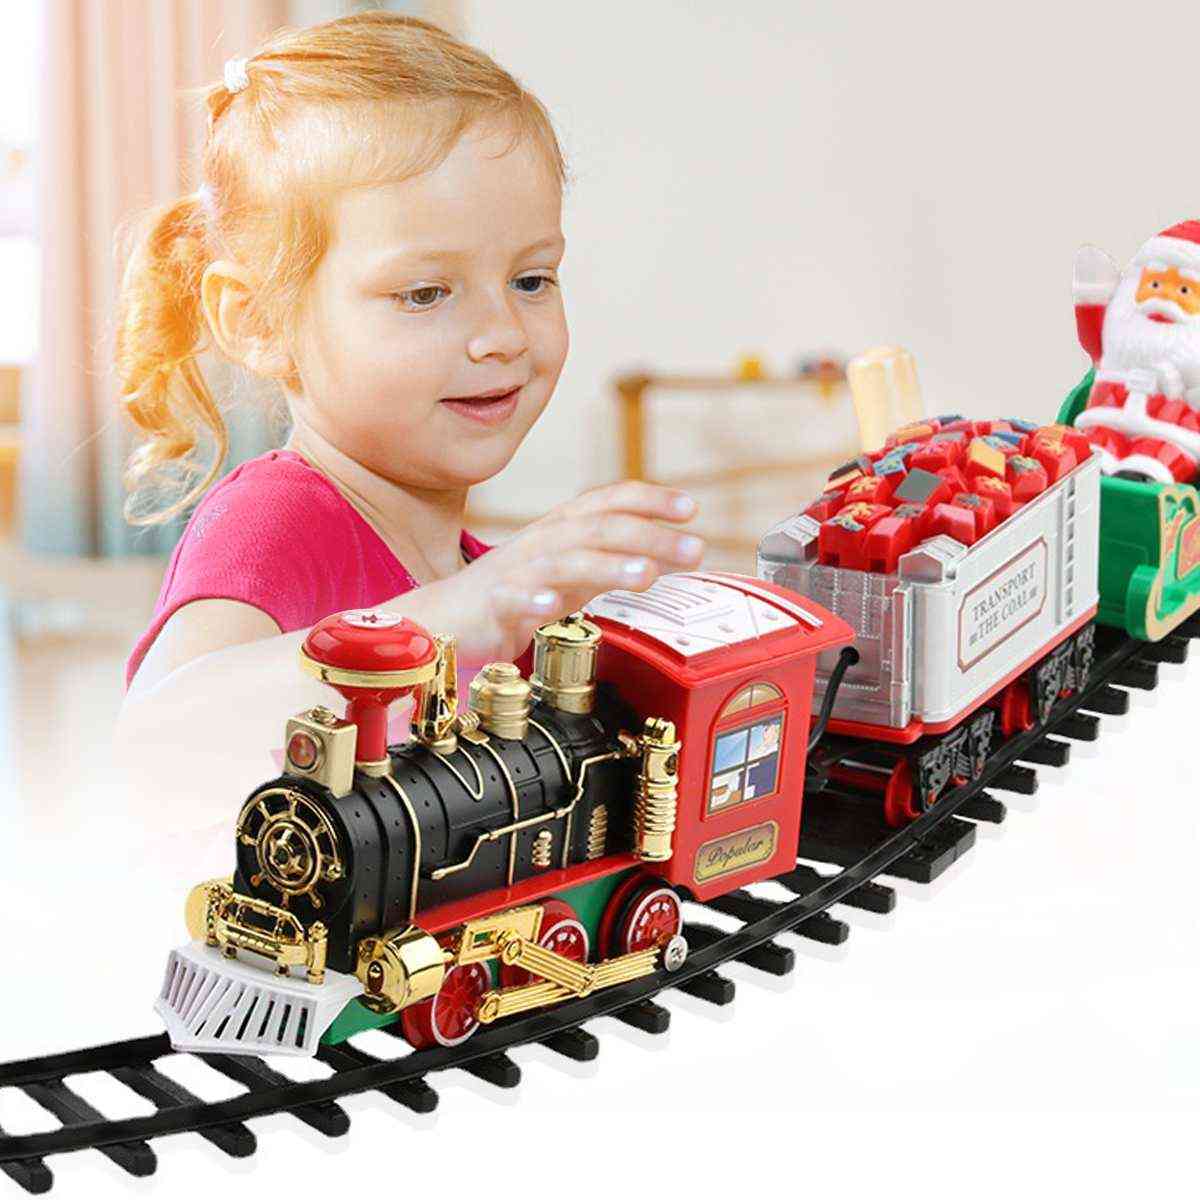 Electric Railway Can Be Installed On The Christmas Tree With Lights